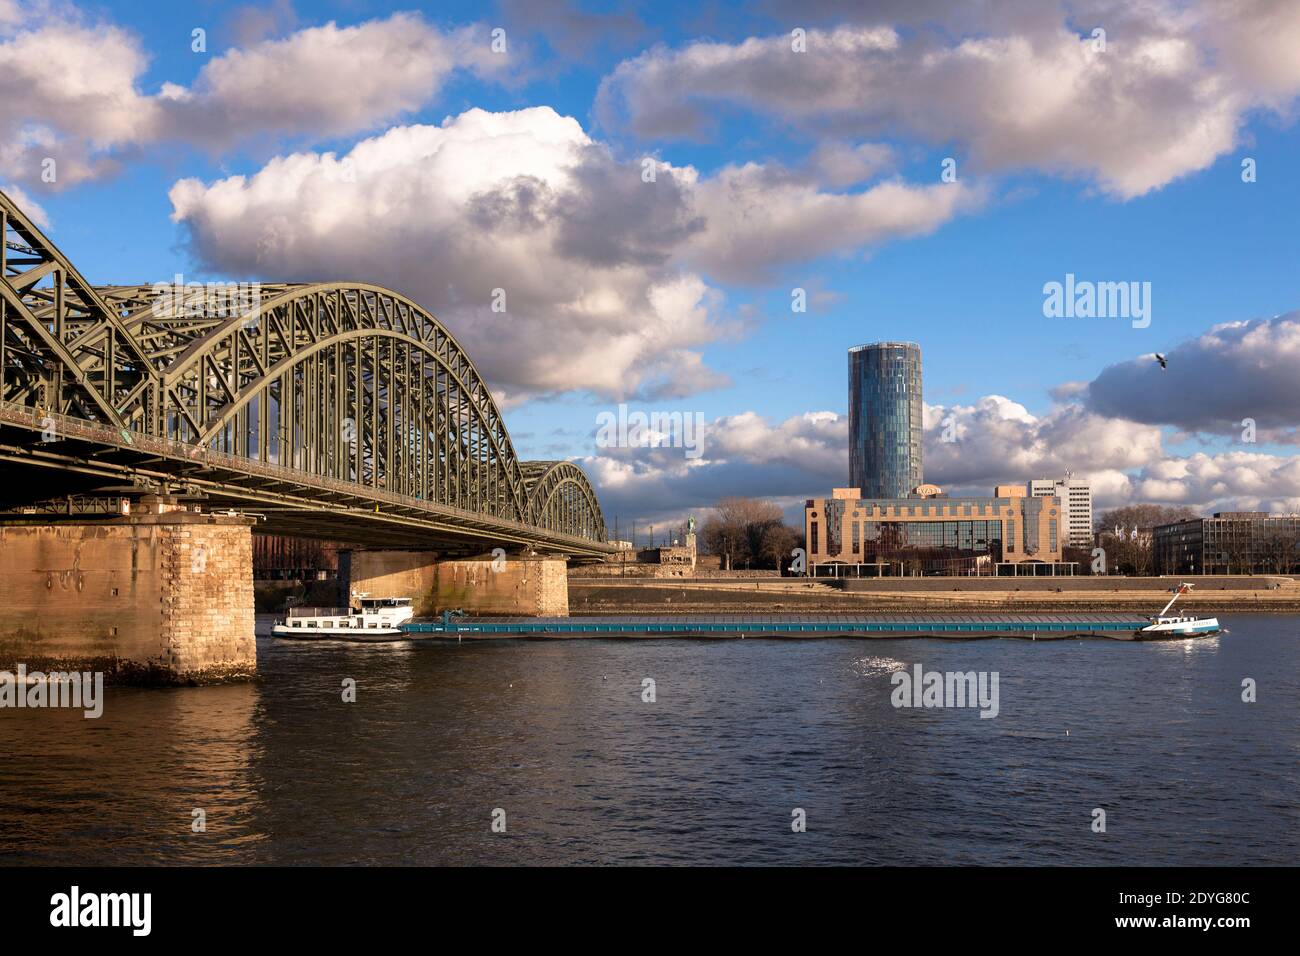 view over the river Rhine to the Hohenzollern bridge, the CologneTriangle skyscraper and the Hyatt Hotel in the district Deutz, Cologne, Germany.  Bli Stock Photo